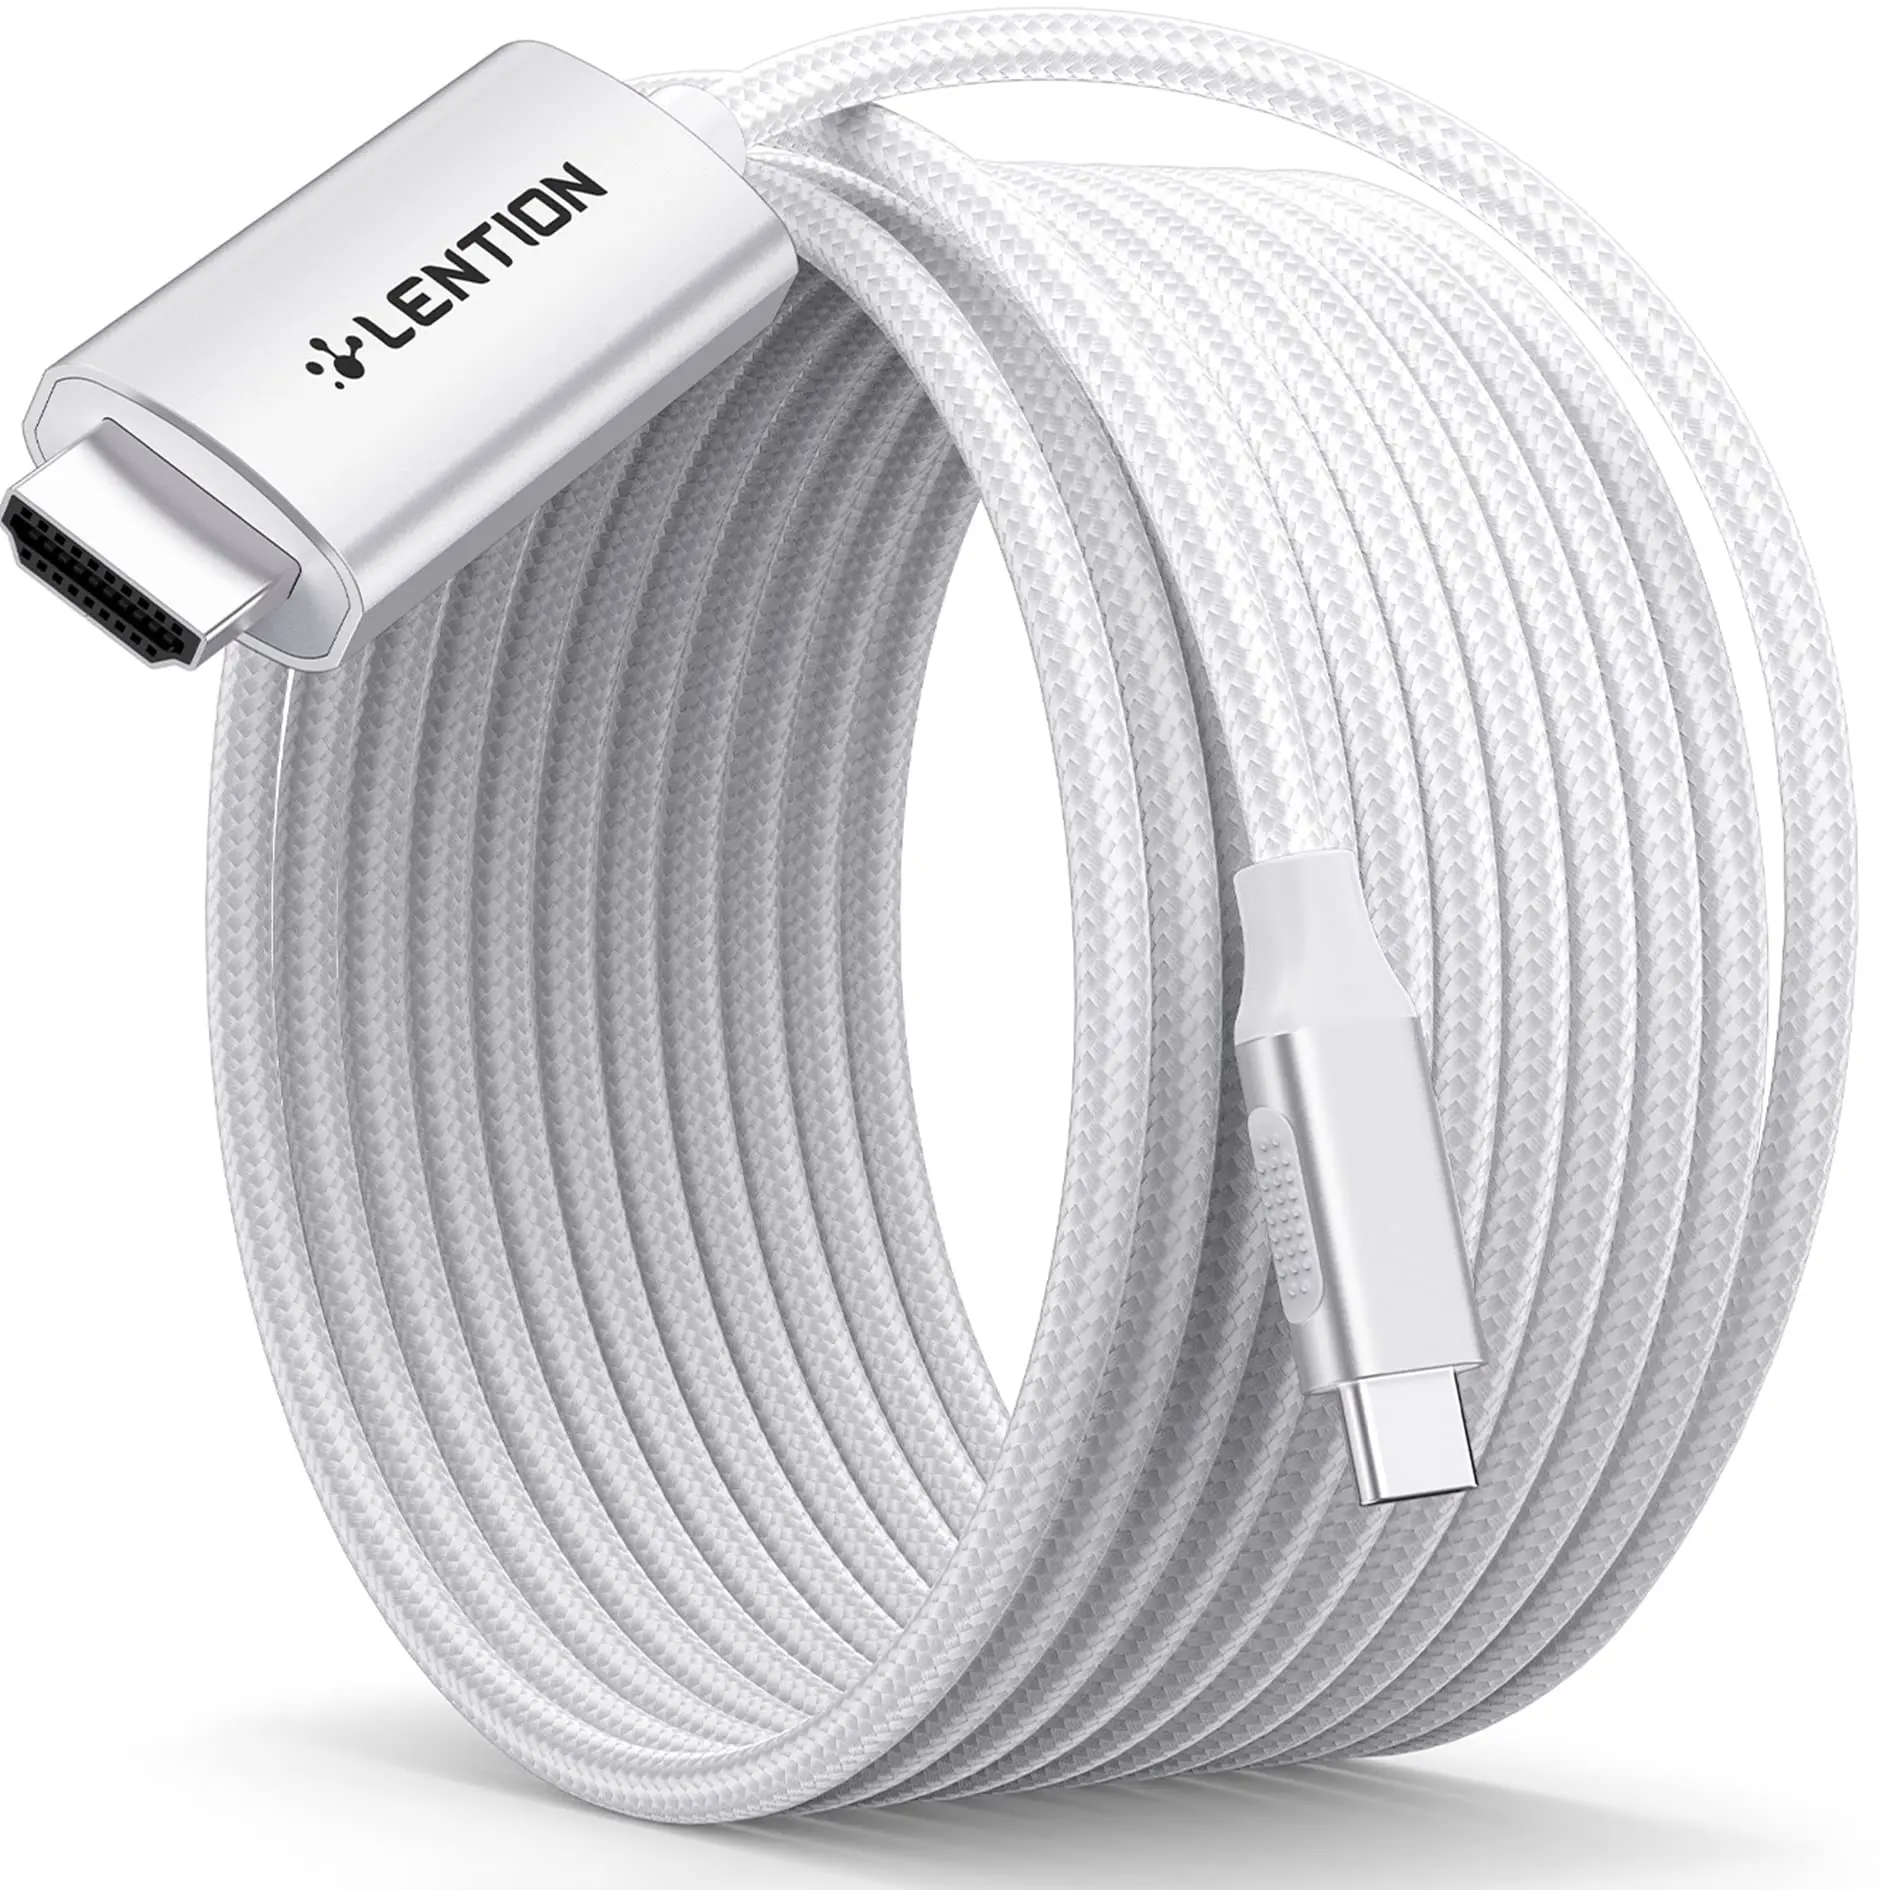 Lention 3M USB C to HDMI 2.0 Cable Cord 4K@60Hz,Thunderbolt 3/4 to HDMI Cable USB-C Compatible 2023-2016 MacBook Pro iPad Galaxy